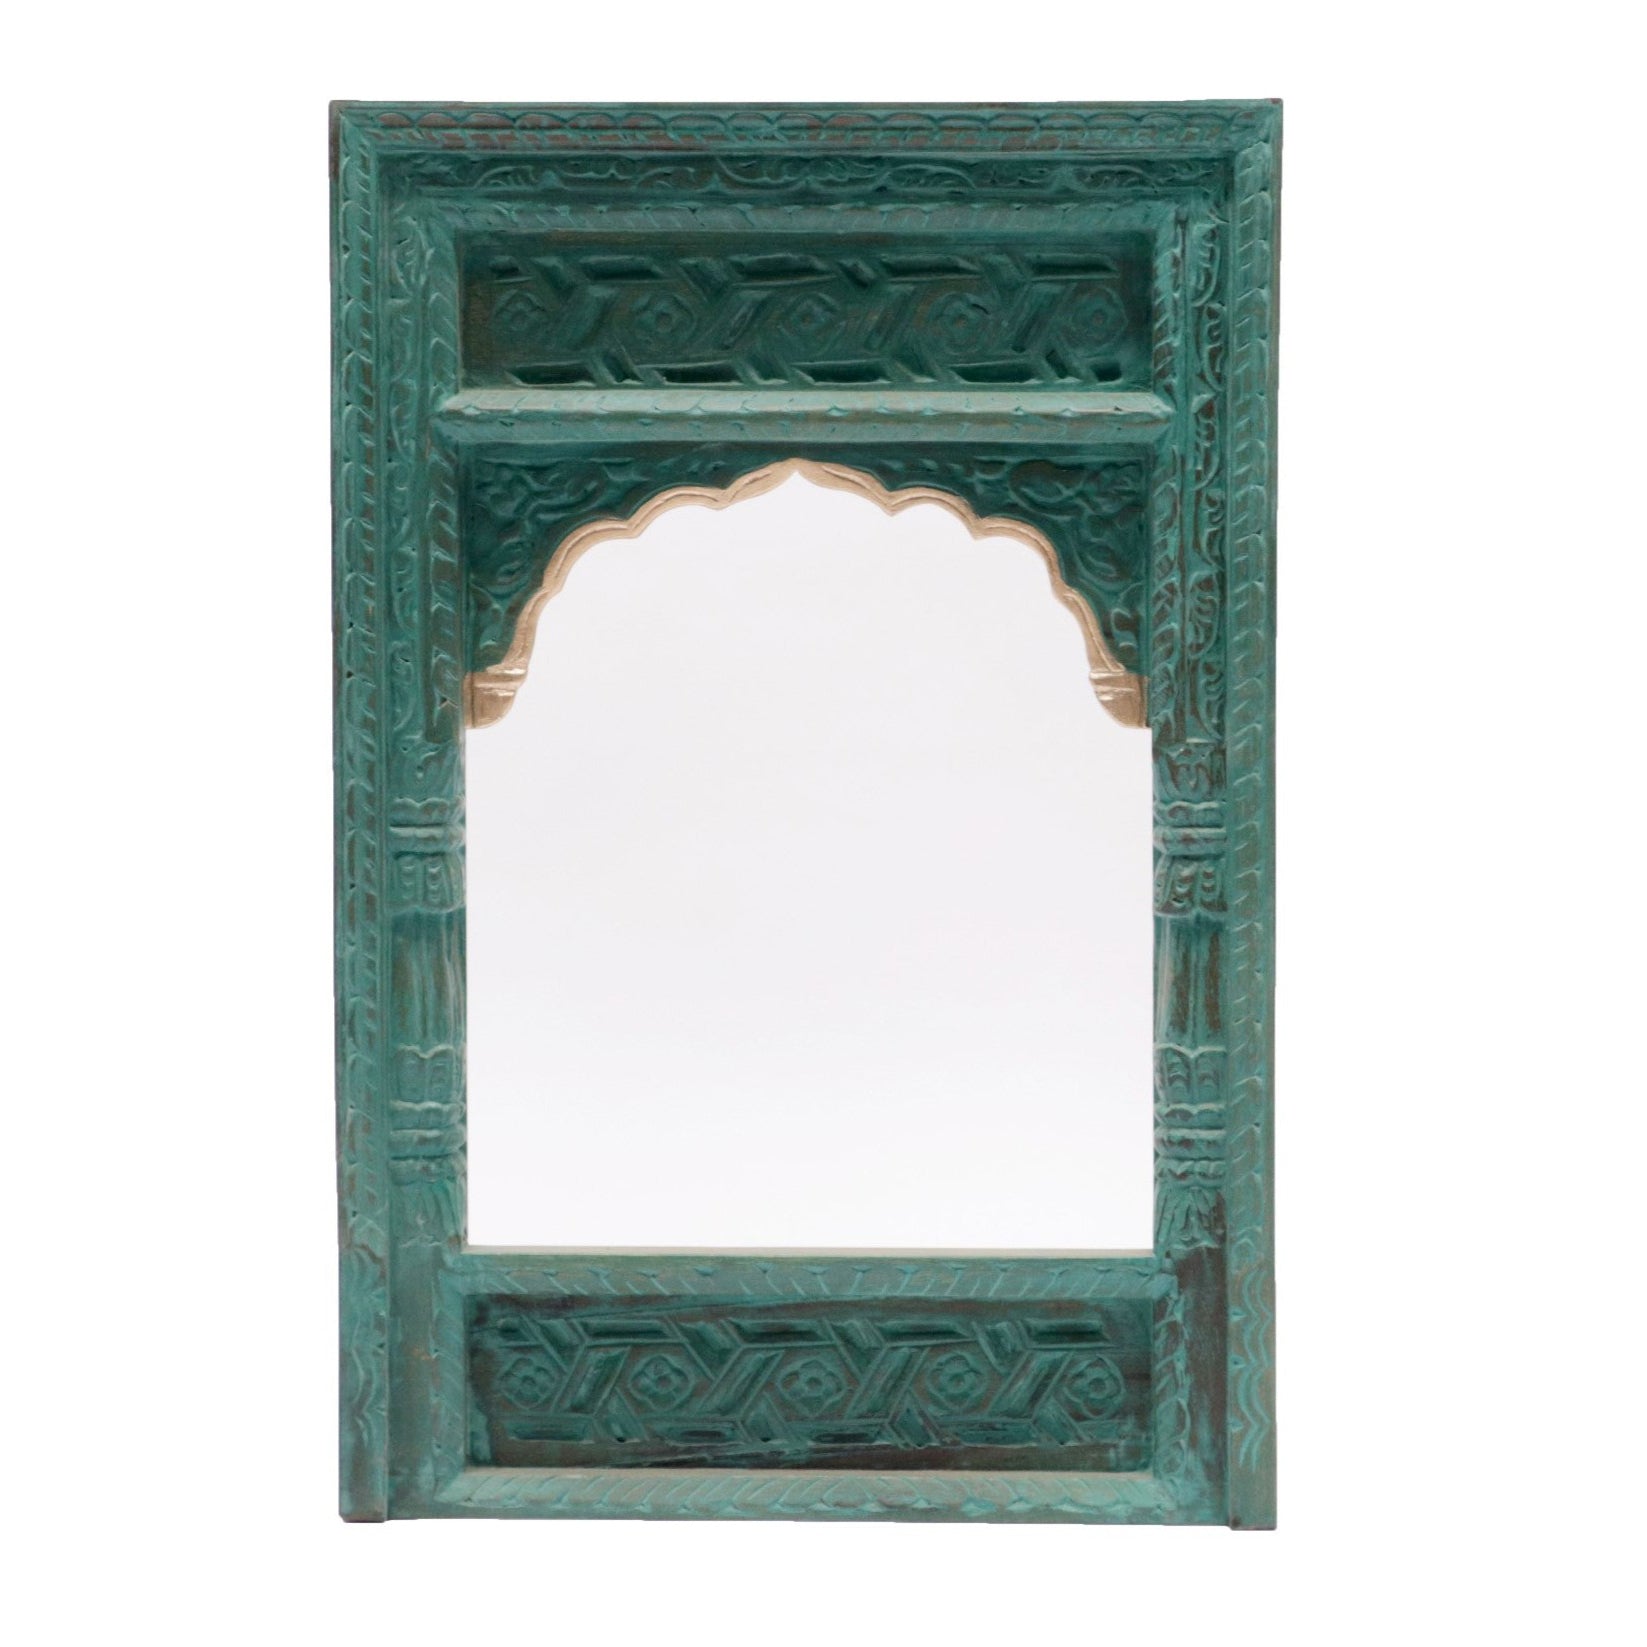 Carved Traditional Wooden Mirror Mirror